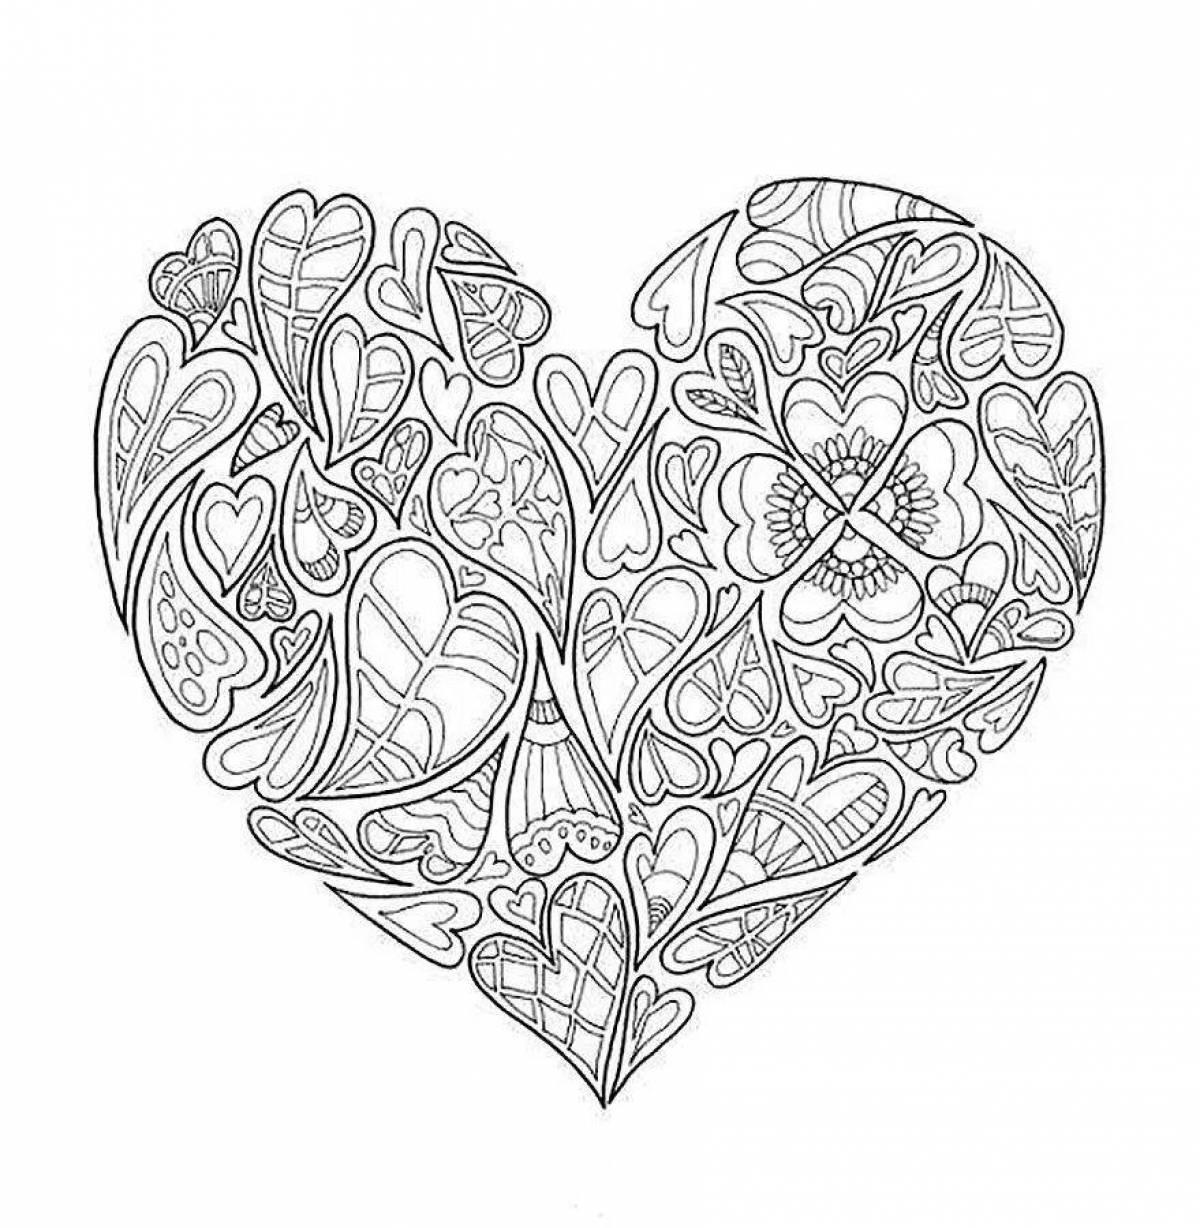 Coloring exquisite heart antistress